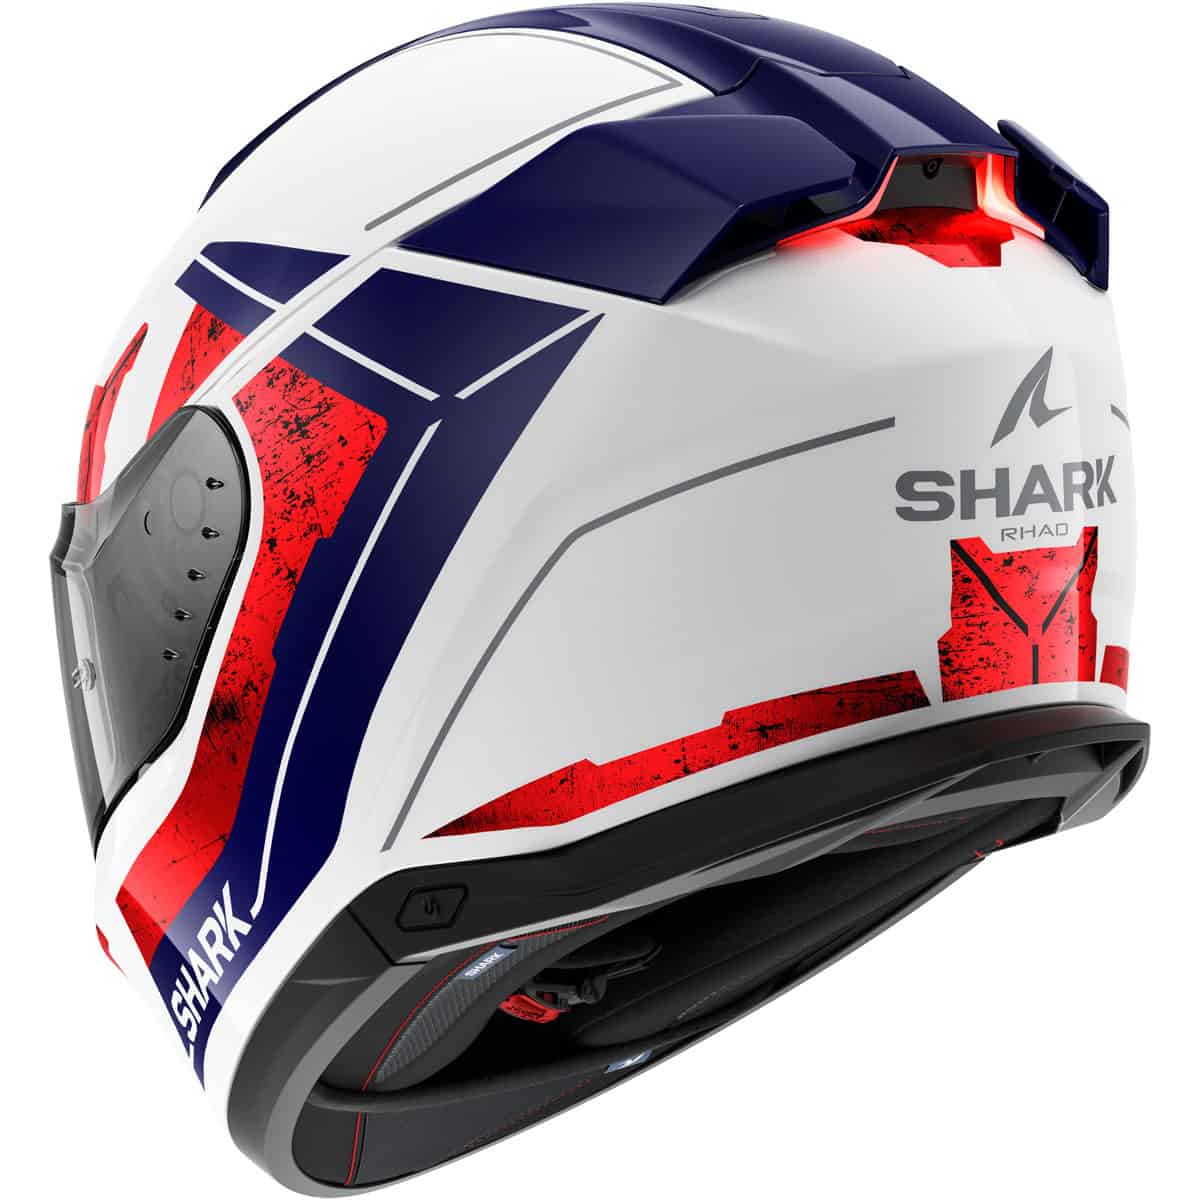 The Shark Skwal i3 helmet is the world's 1st helmet with integrated brake lights. This advanced full-face helmet from Shark components LED lighting with an integrated accelerometer to activate the rear brake lights during braking, without having to use cables or Bluetooth! 3